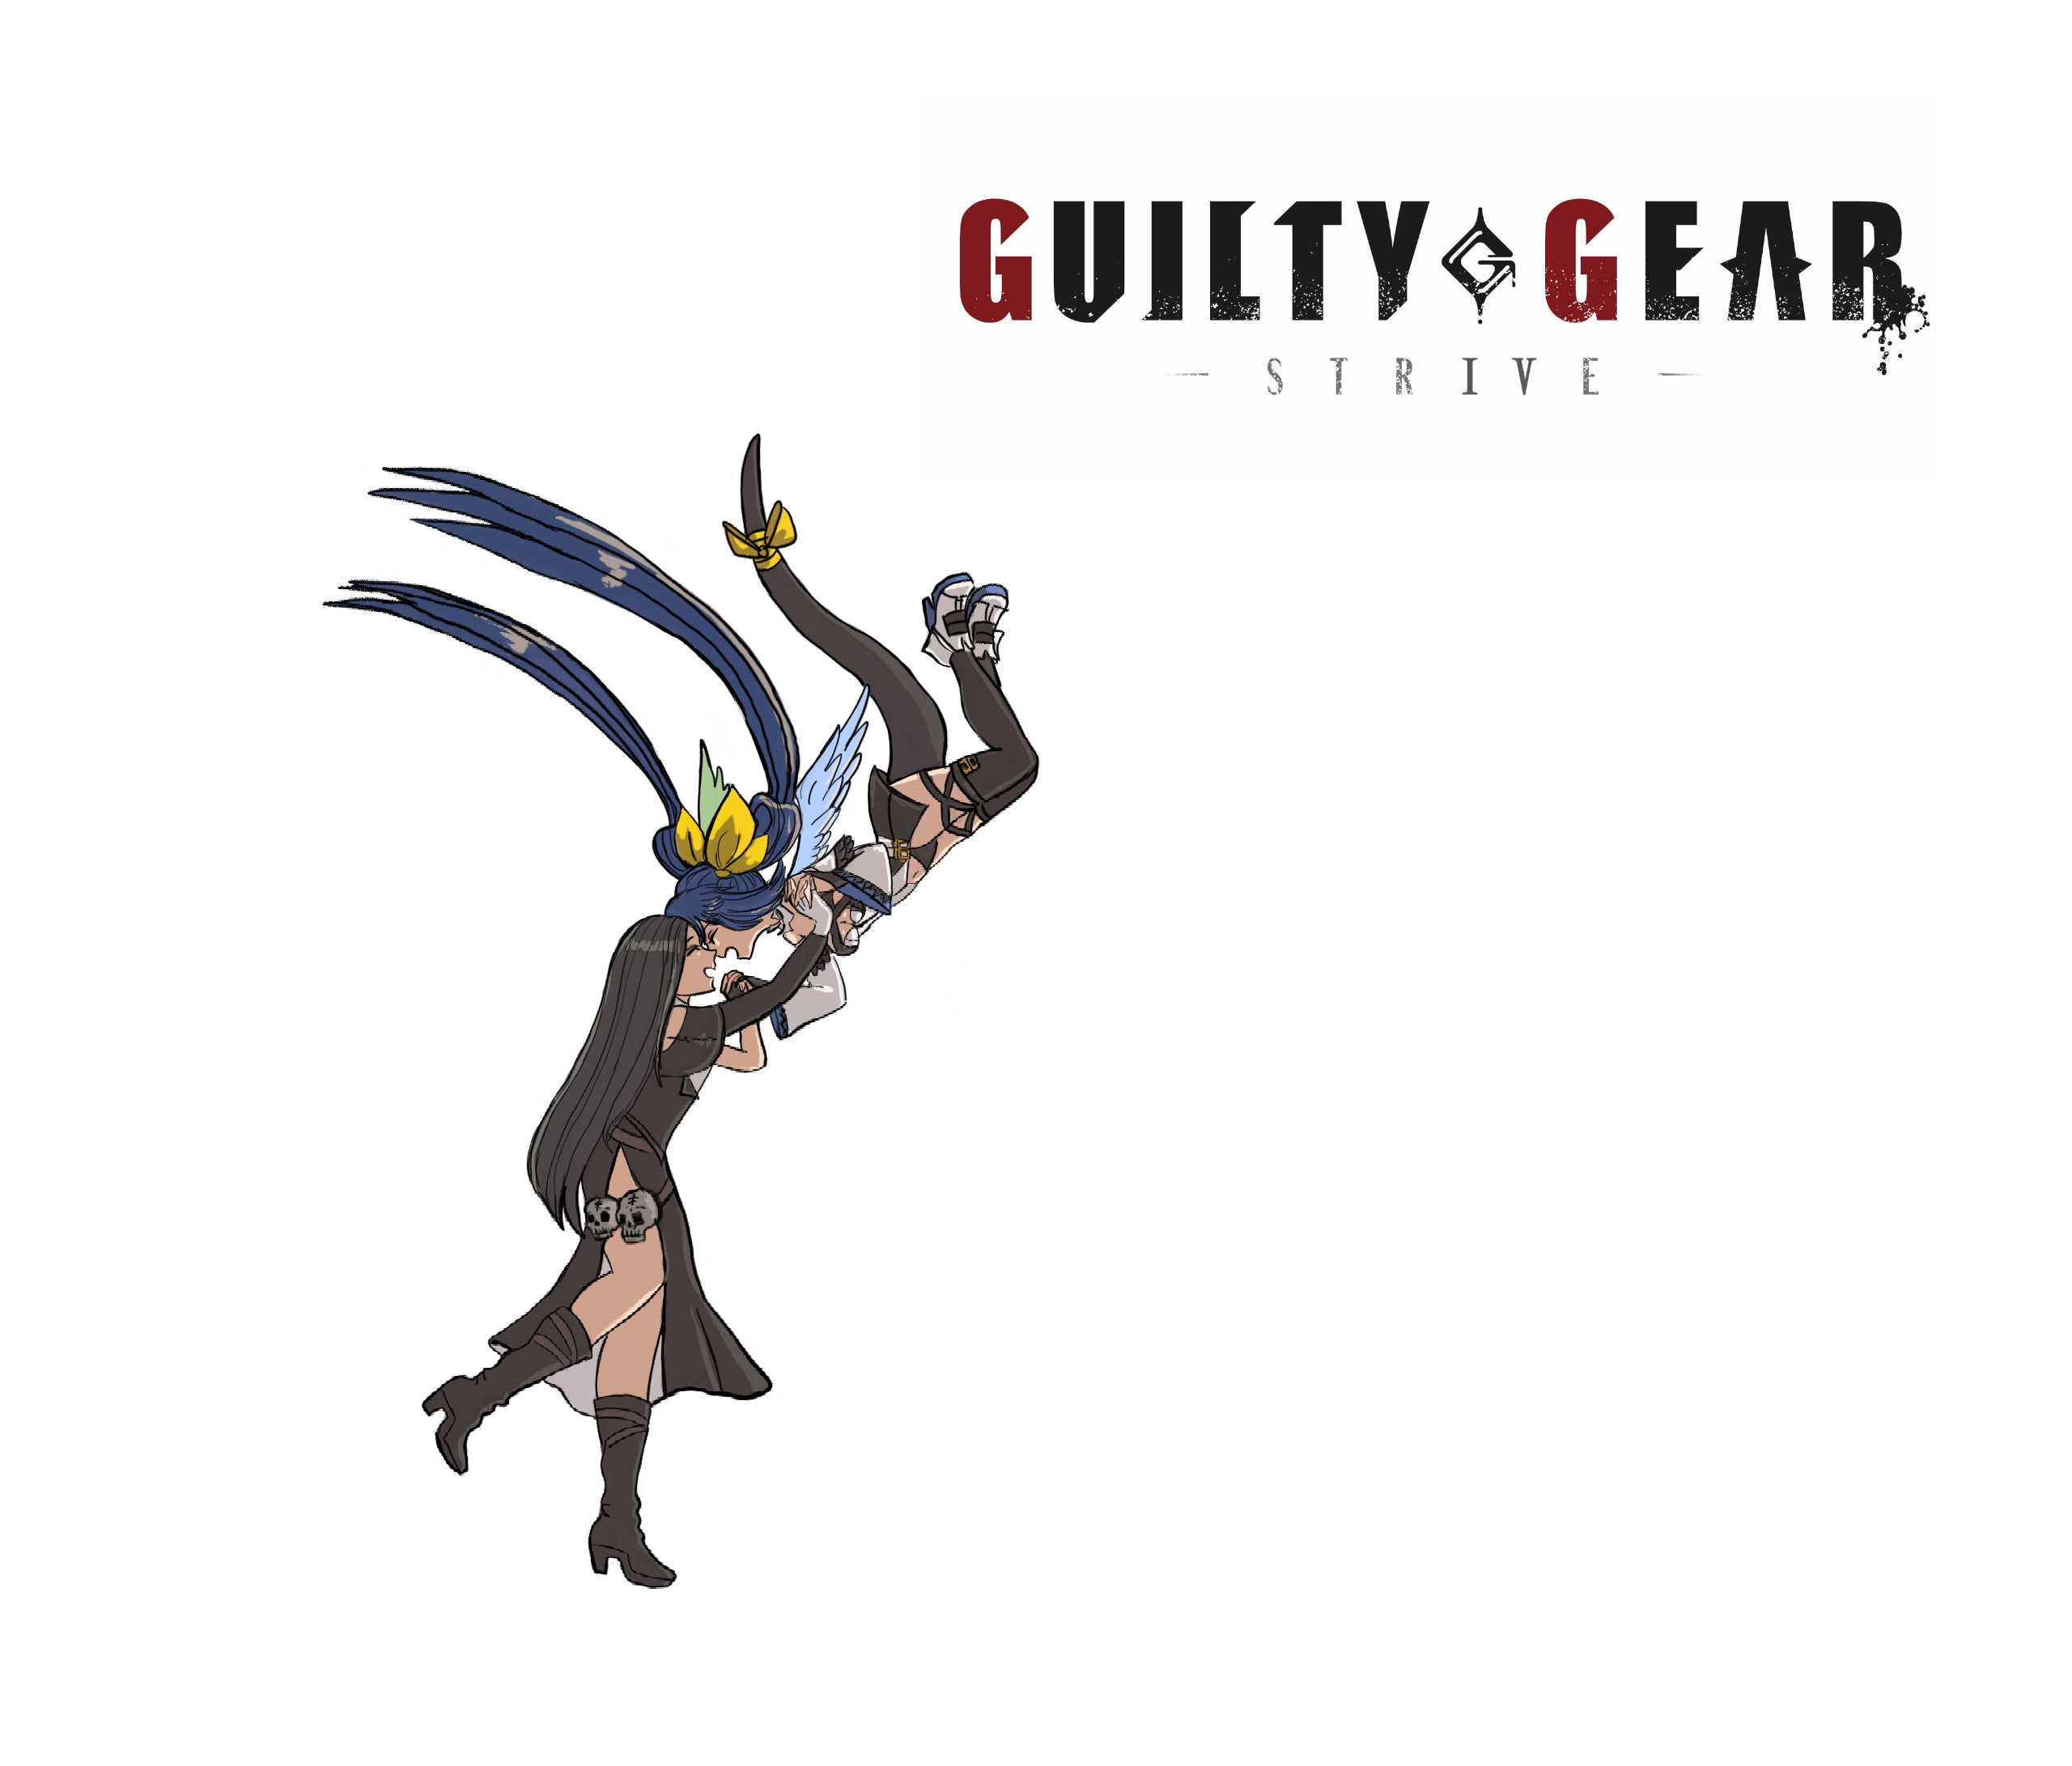 Anime 2560x2182 Guilty Gear Guilty gear strive Dizzy (Guilty Gear) Testament (guilty gear) women anime girl with wings anime games anime girls yuri couple Fighting Games anime couple boots minimalism white background simple background Testament x Dizzy